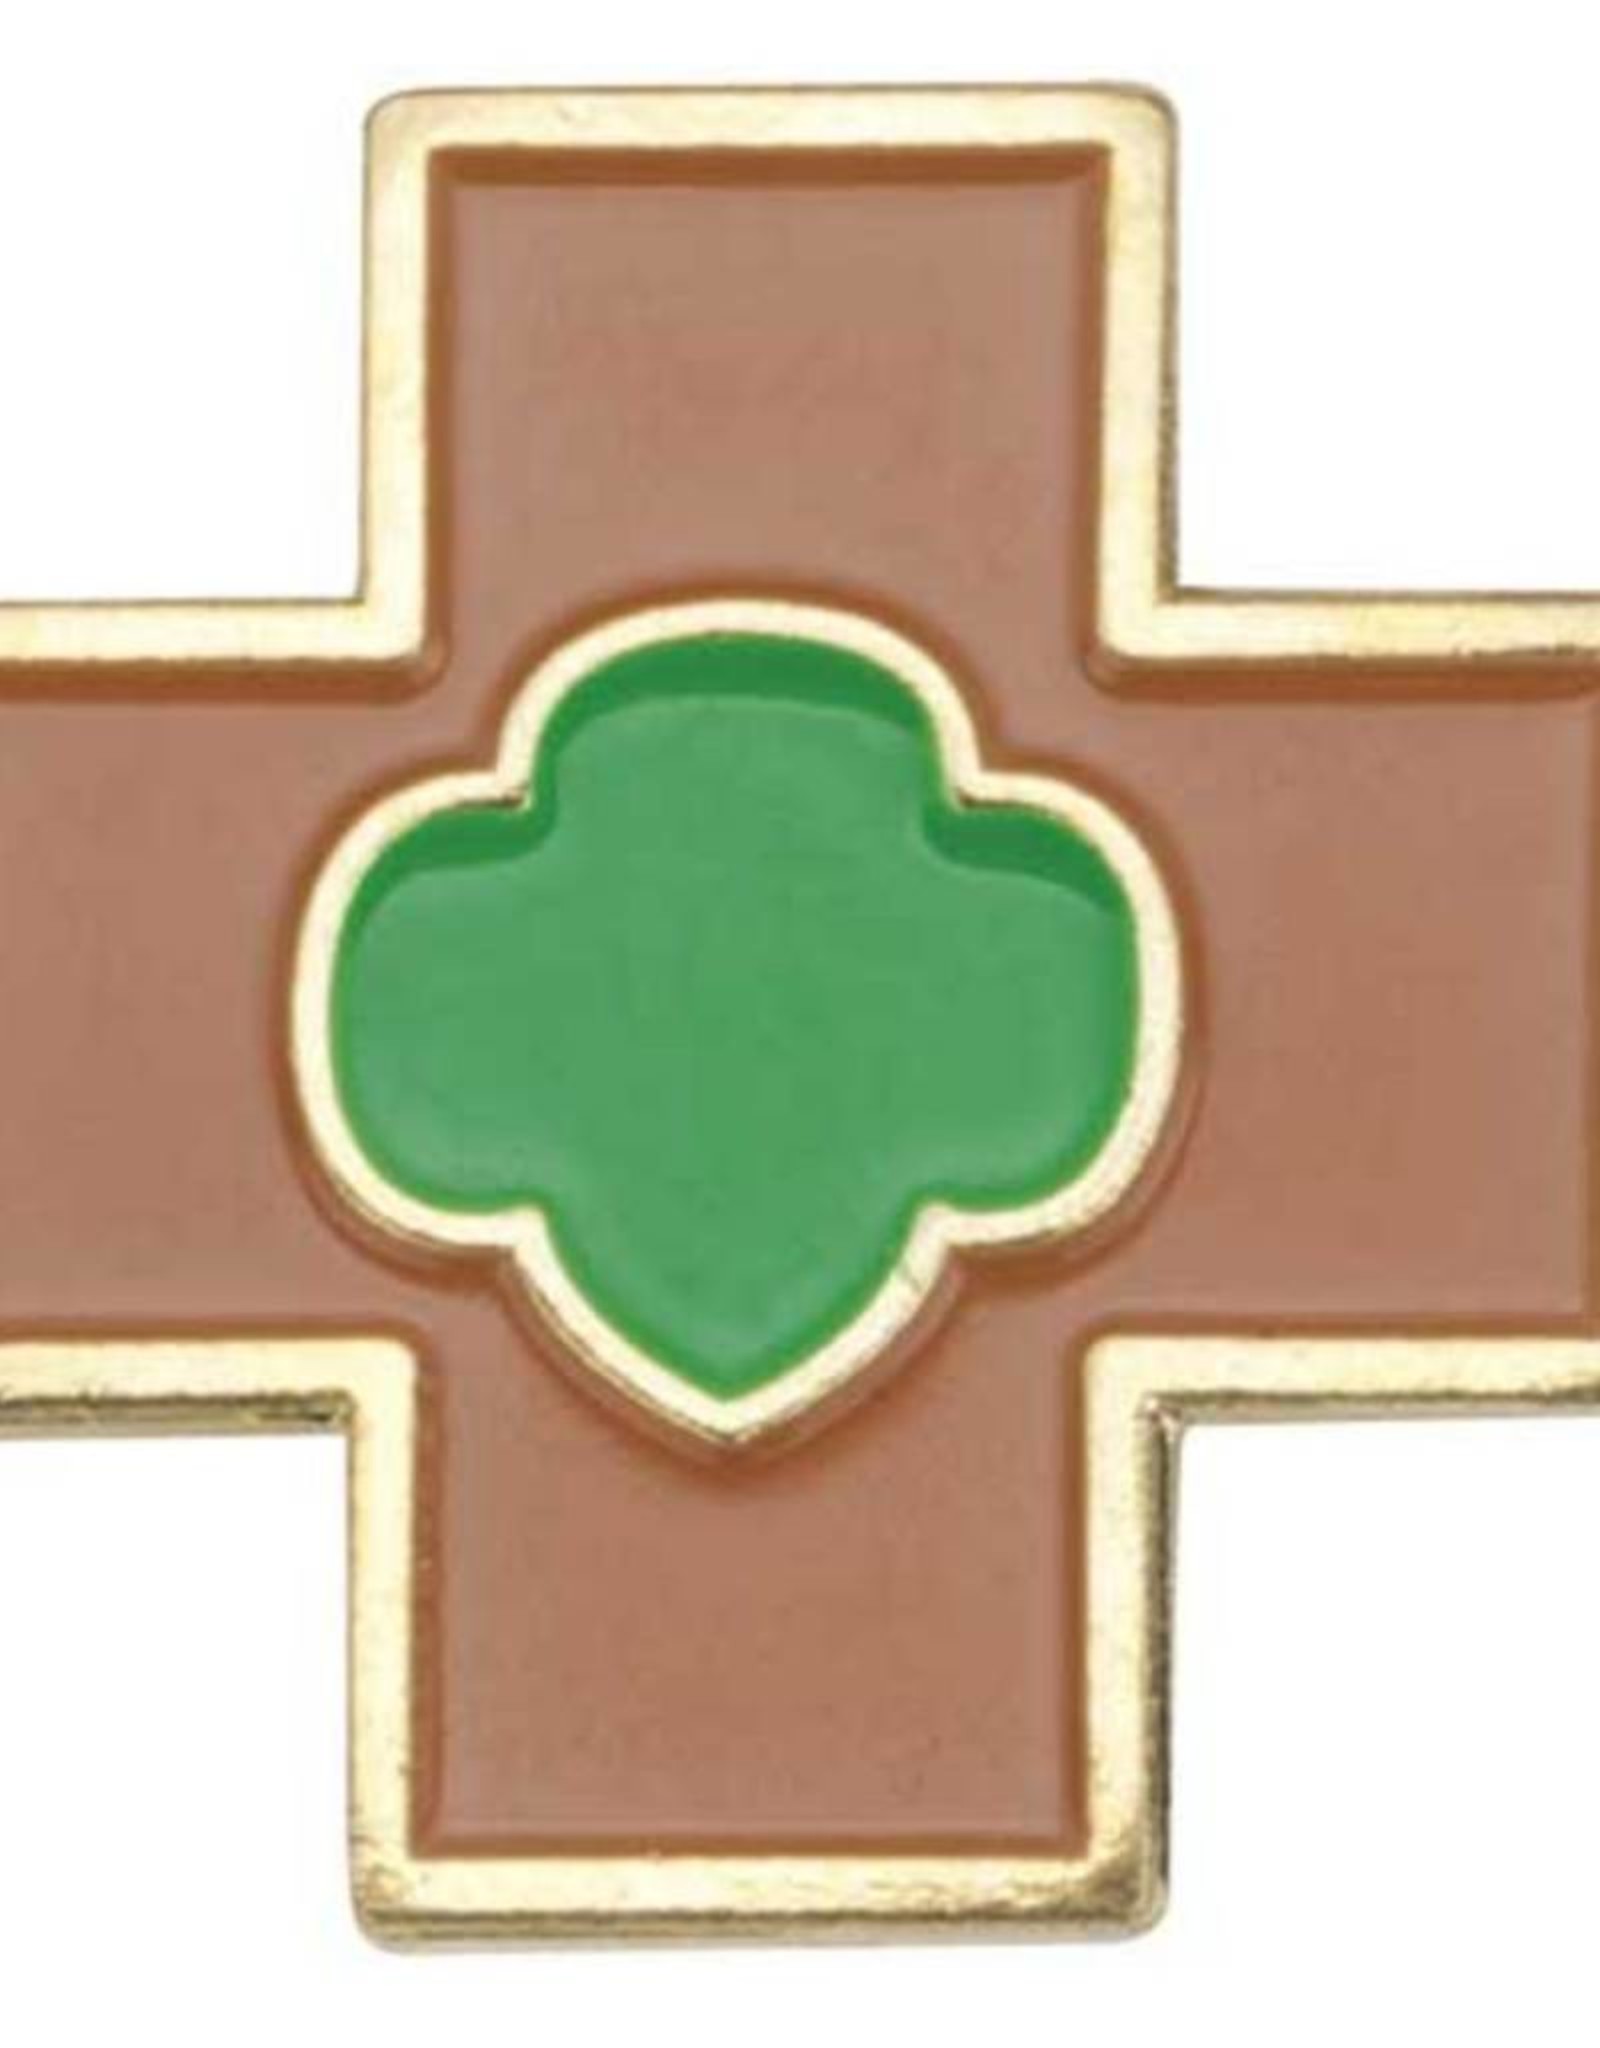 GIRL SCOUTS OF THE USA Brownie Safety Award Pin